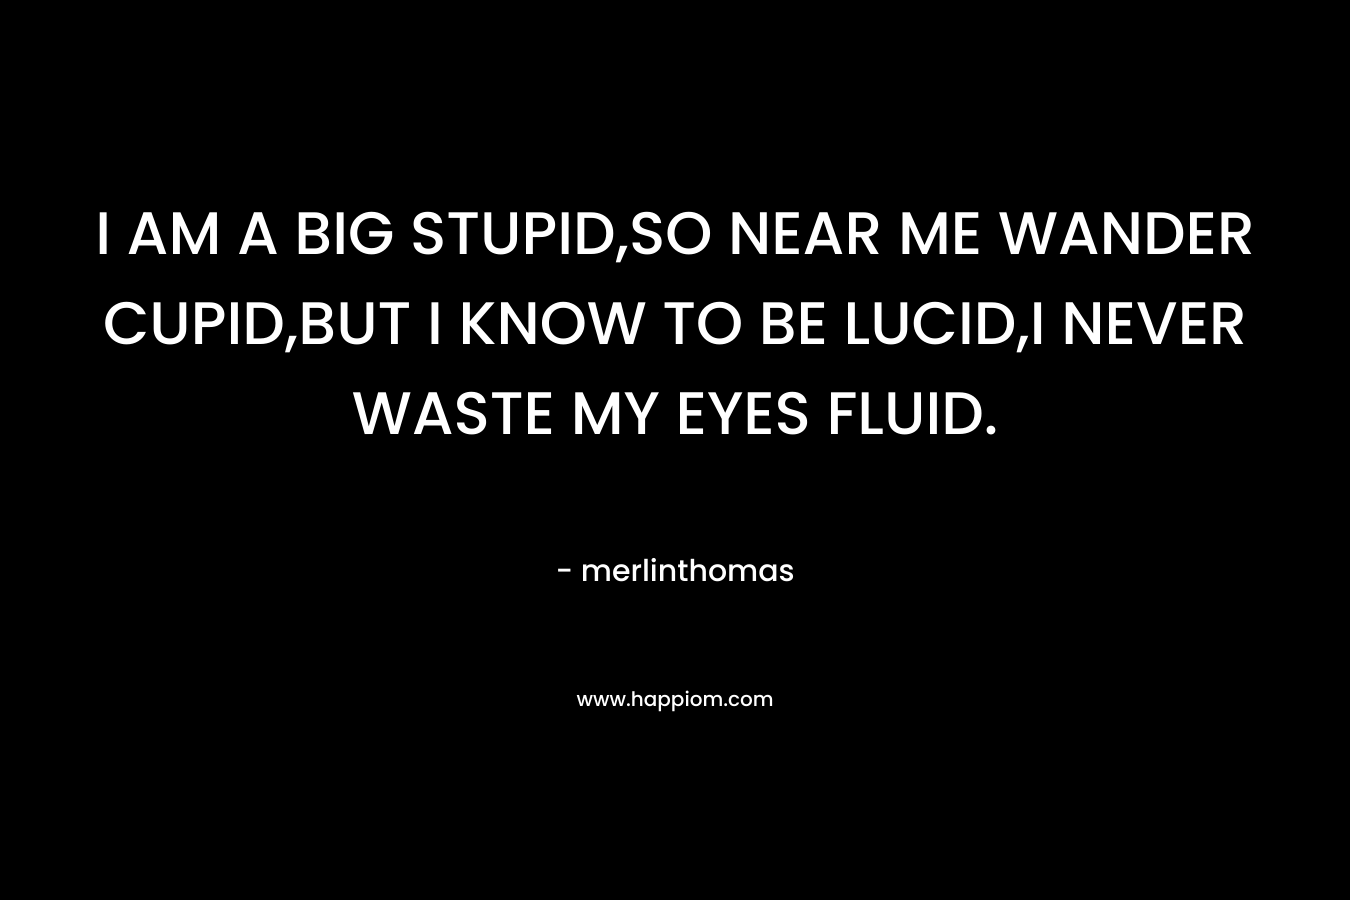 I AM A BIG STUPID,SO NEAR ME WANDER CUPID,BUT I KNOW TO BE LUCID,I NEVER WASTE MY EYES FLUID.